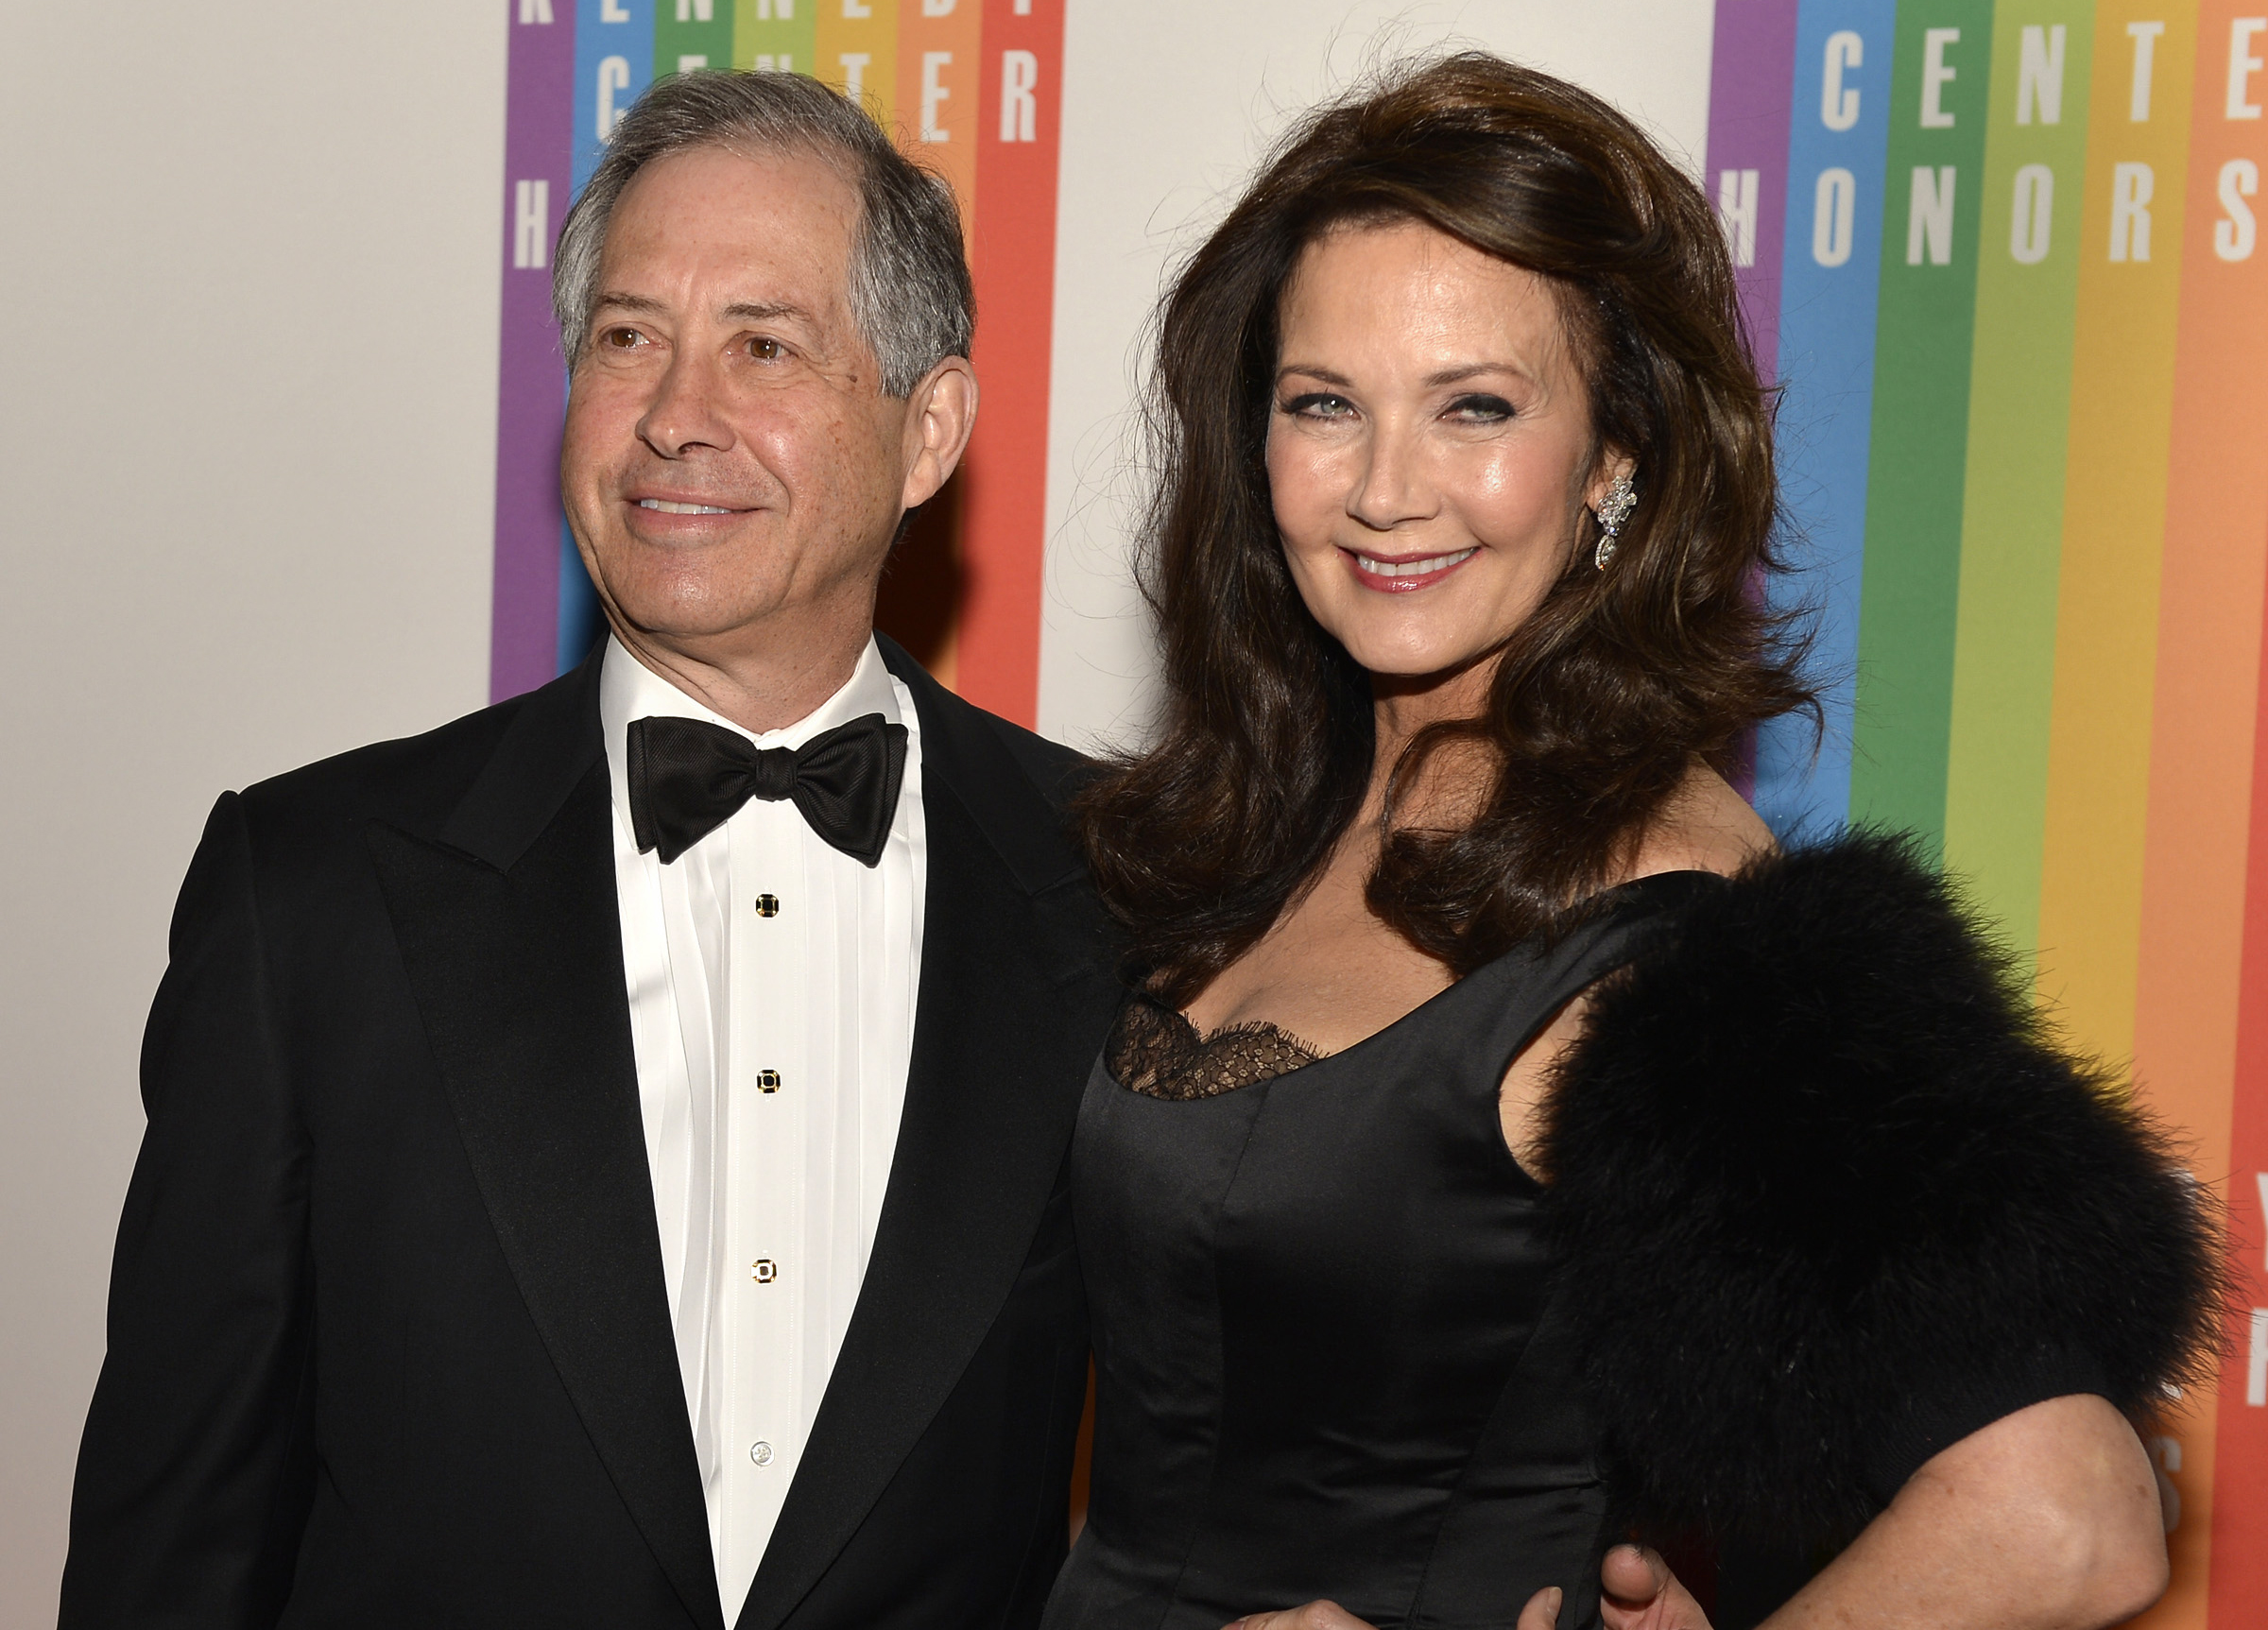 <p><span>"Wonder Woman" star Lynda Carter lost her husband of 37 years, Robert Altman, on Feb. 3, 2021. The attorney, who was 73, died of myelofibrosis -- a rare type of blood cancer. "It's totally frightening. I don't know who I am without Robert," Lynda told </span><a href="https://people.com/tv/wonder-woman-lynda-carter-reflects-losing-husband-37-years-robert-altman/">People</a><span> magazine later that year. "It still gets me. I just can't believe I've lost him."</span></p><p>MORE: <a href="https://www.wonderwall.com/celebrity/fetty-wap-and-more-stars-who-lost-children-in-2021-482796.gallery">Stars who've lost children in recent years</a></p>